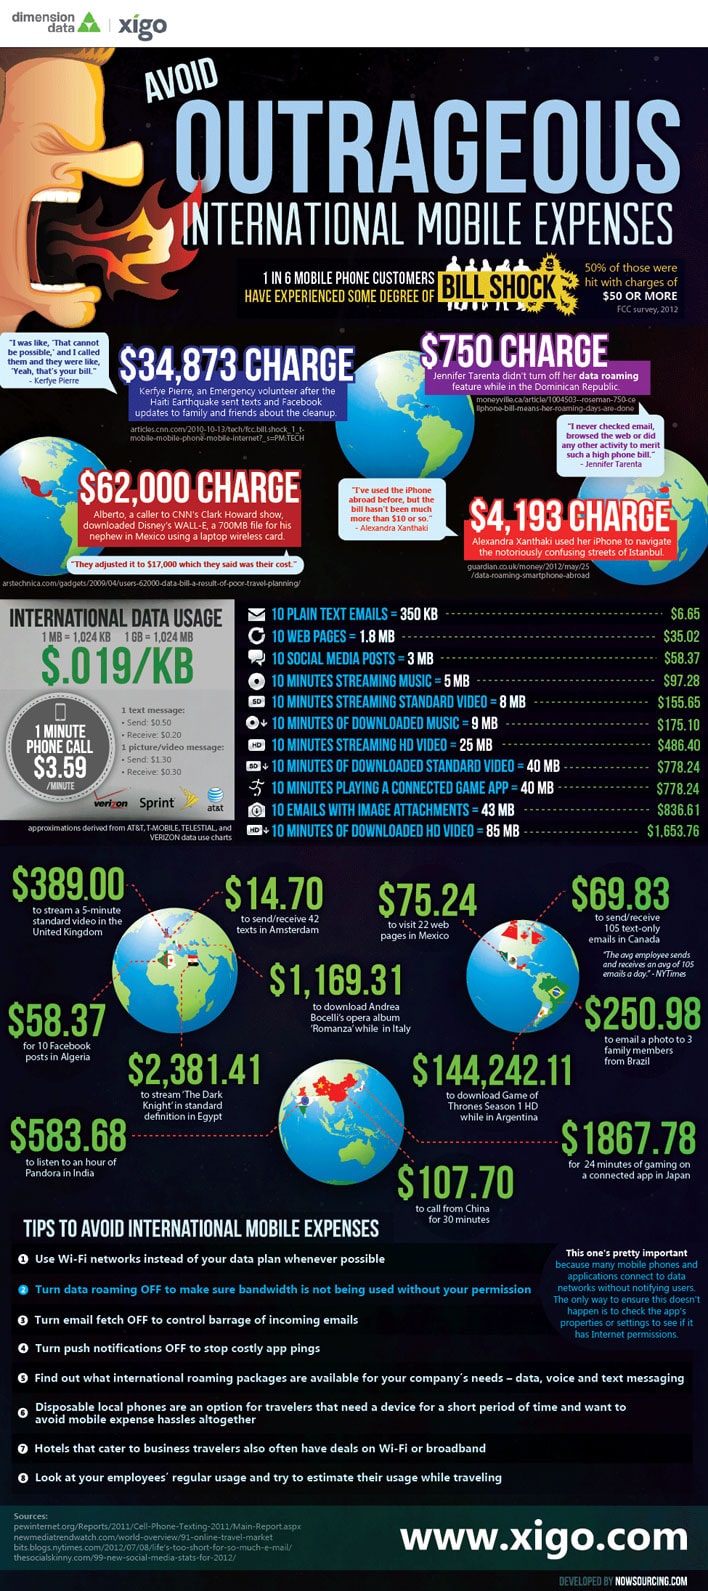 8 Tips To Avoid Outrageous International Mobile Charges [Infographic]